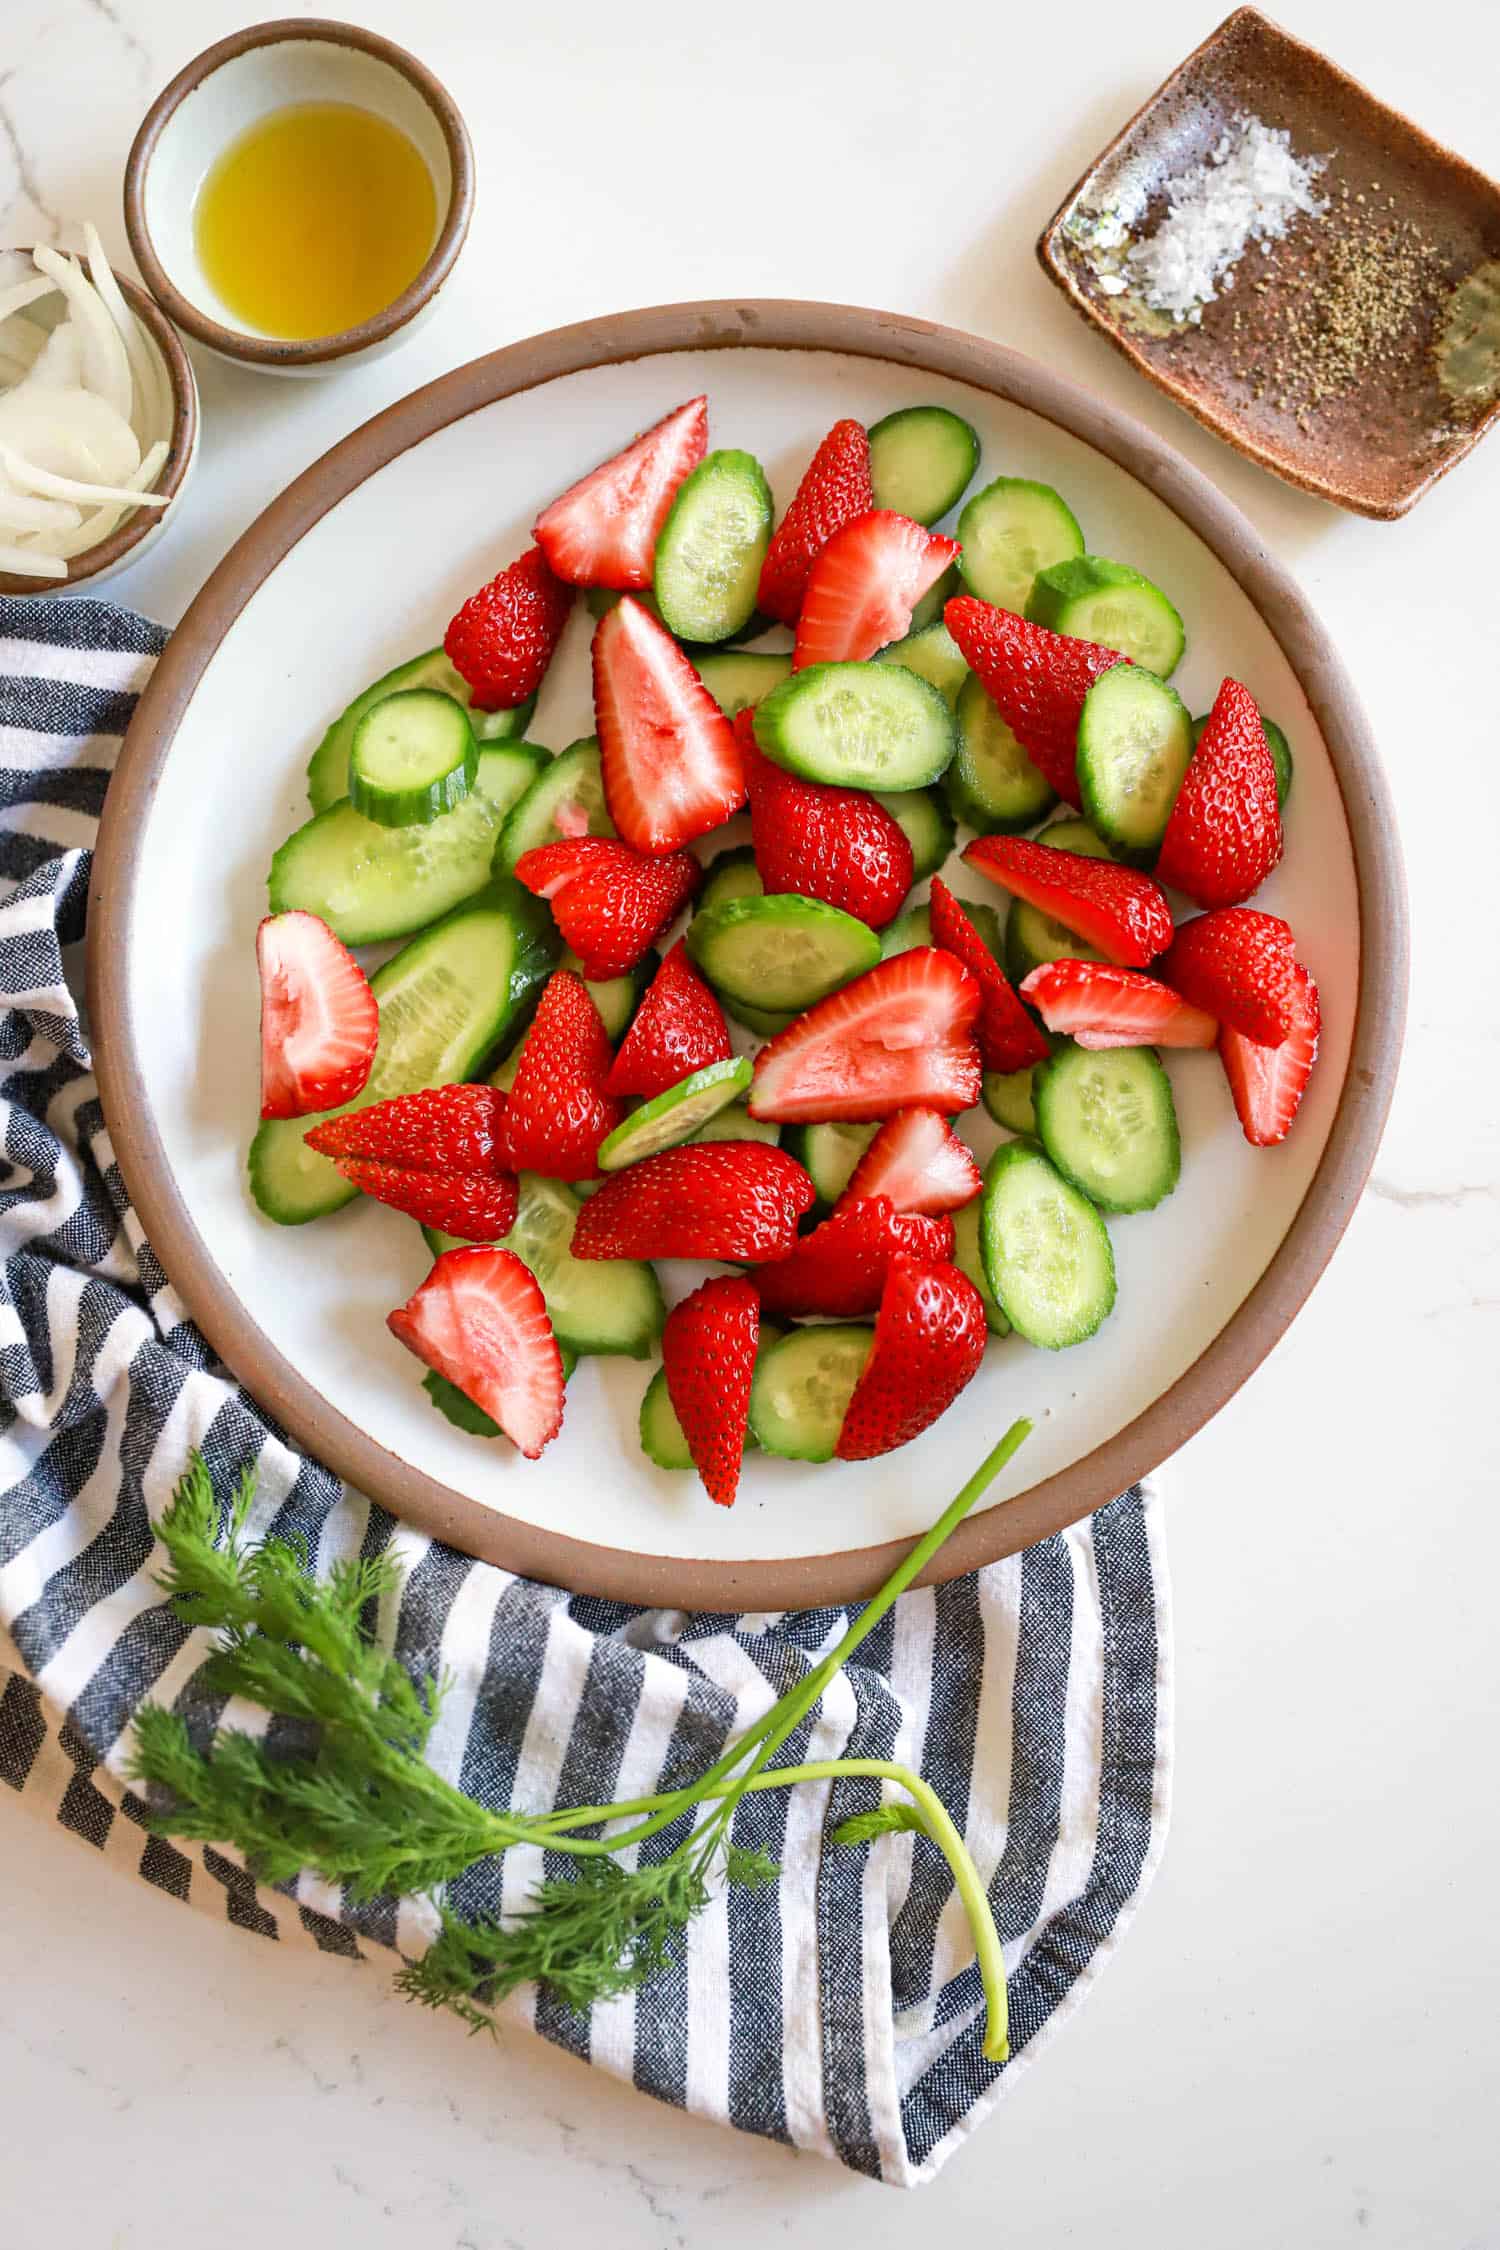 Gray plate of strawberries and cucumbers with fresh dill on the edge.